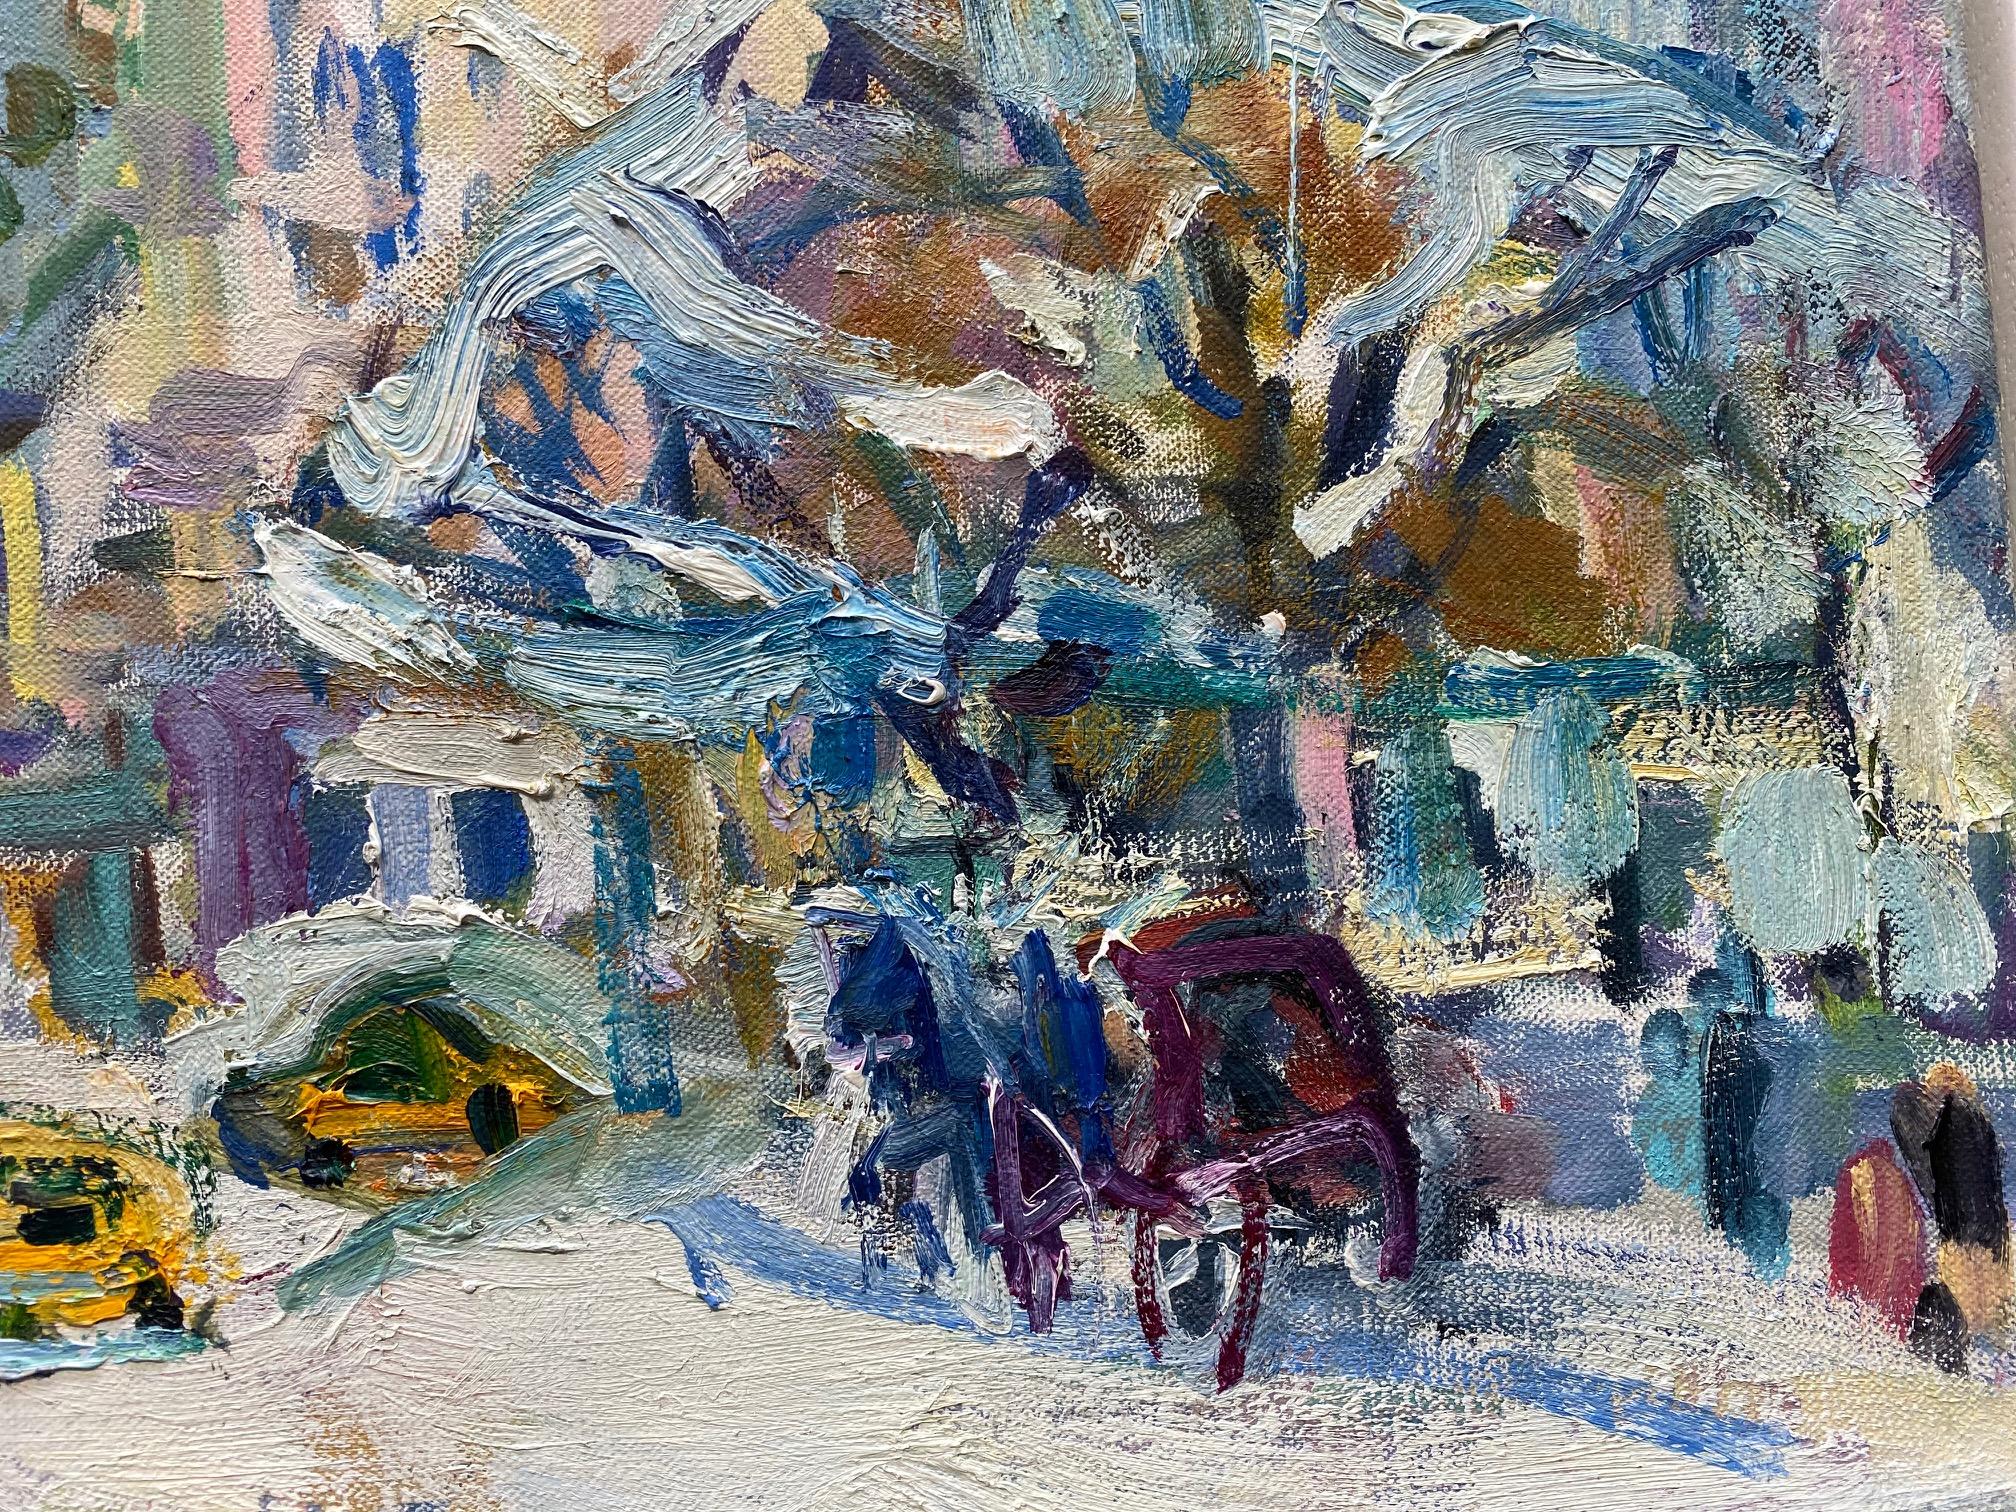 In Front of the Plaza, original abstract expressionist New York City landscape - Gray Landscape Painting by Sonia Grineva